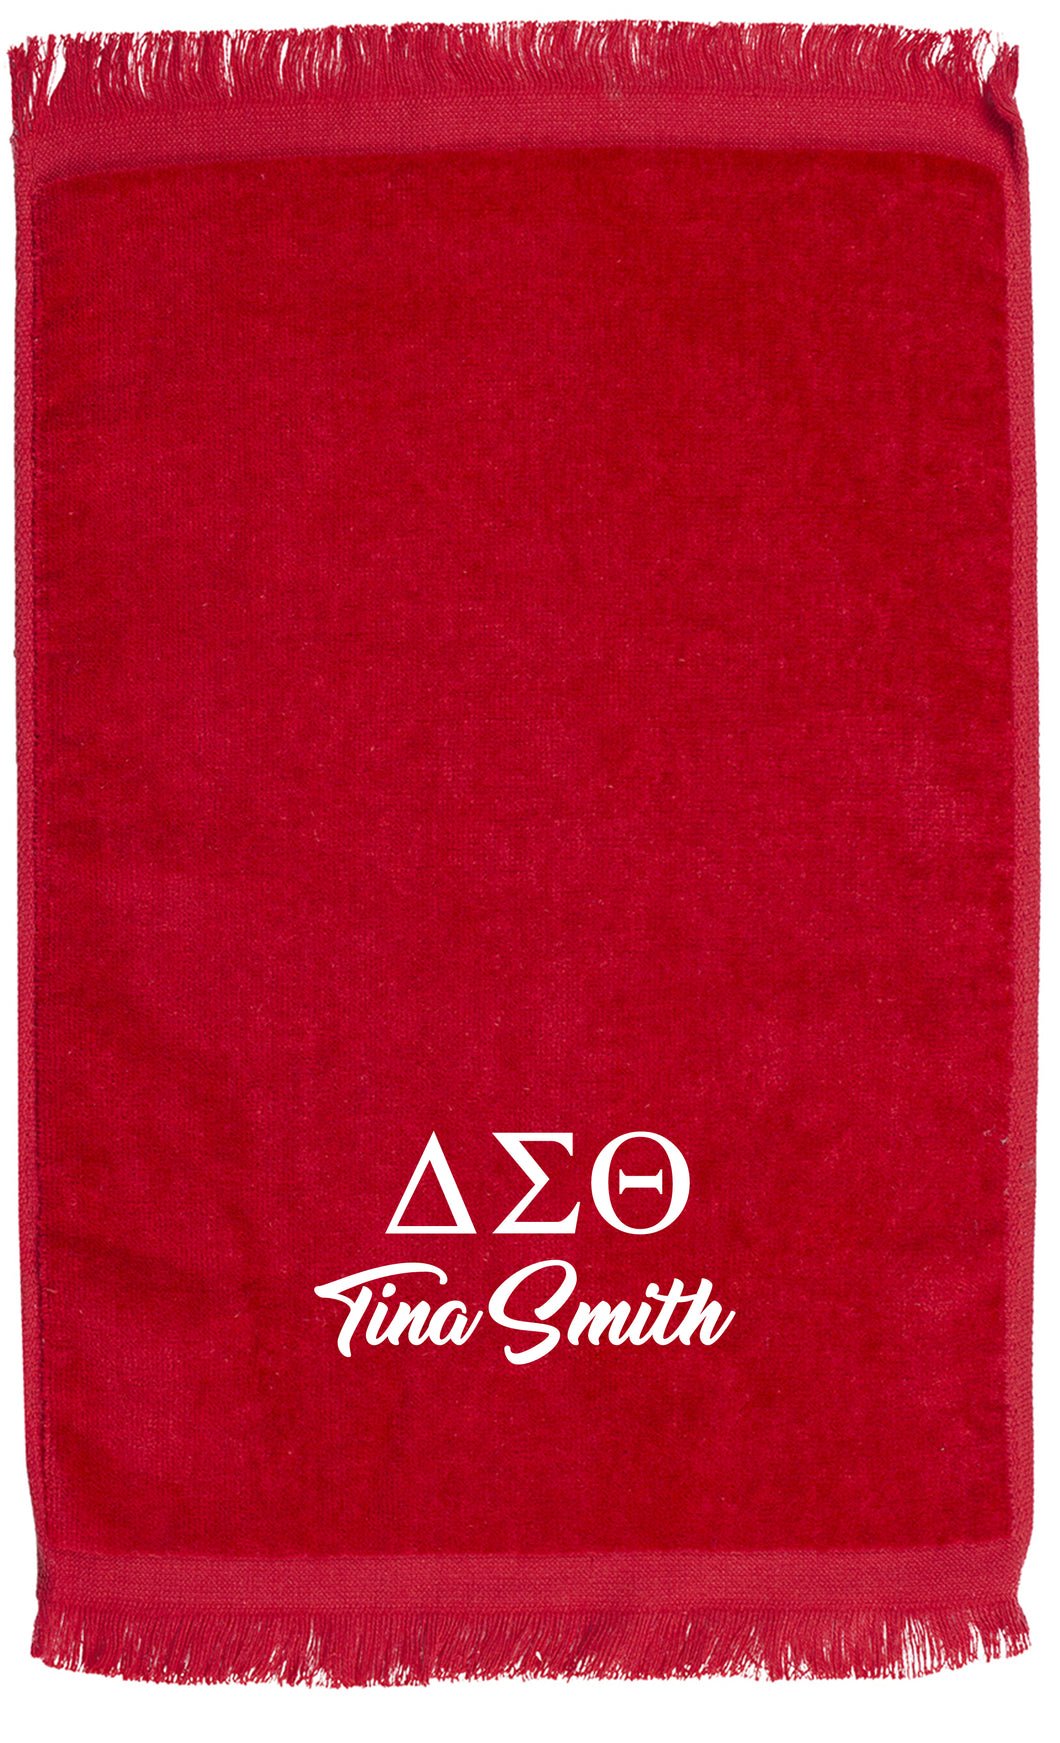 Hand Towels (GREEK) Life Sorority PERSONALIZED FREE SHIPPING